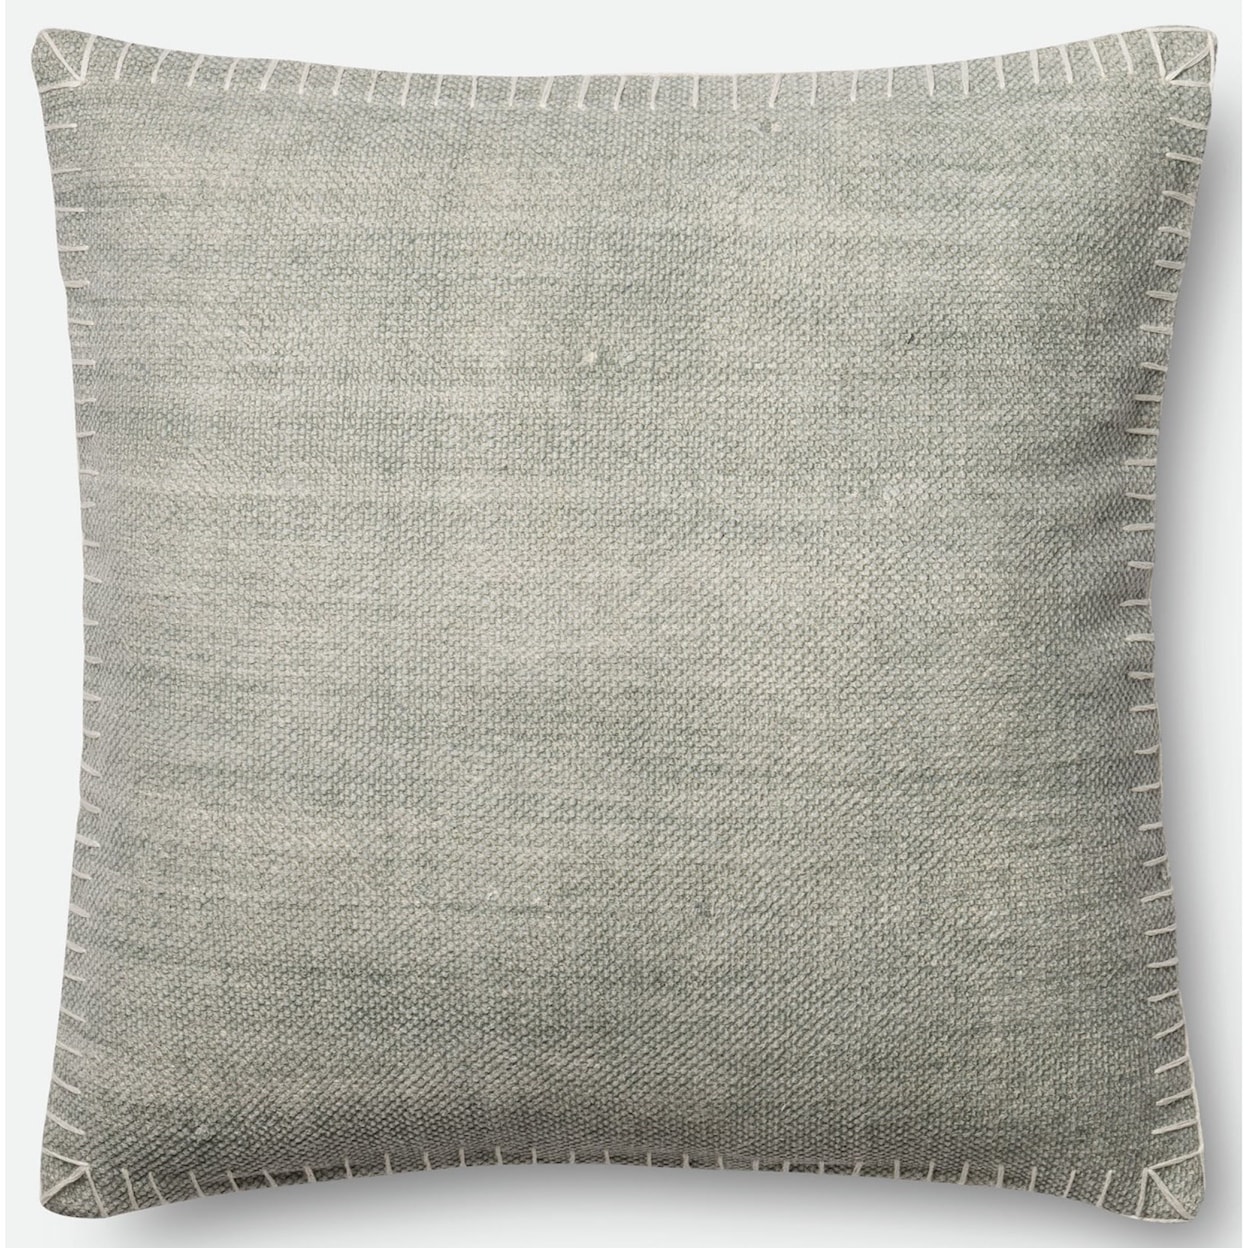 Magnolia Home by Joanna Gaines for Loloi Accent Pillows 22" X 22" Cover w/Poly Pillow